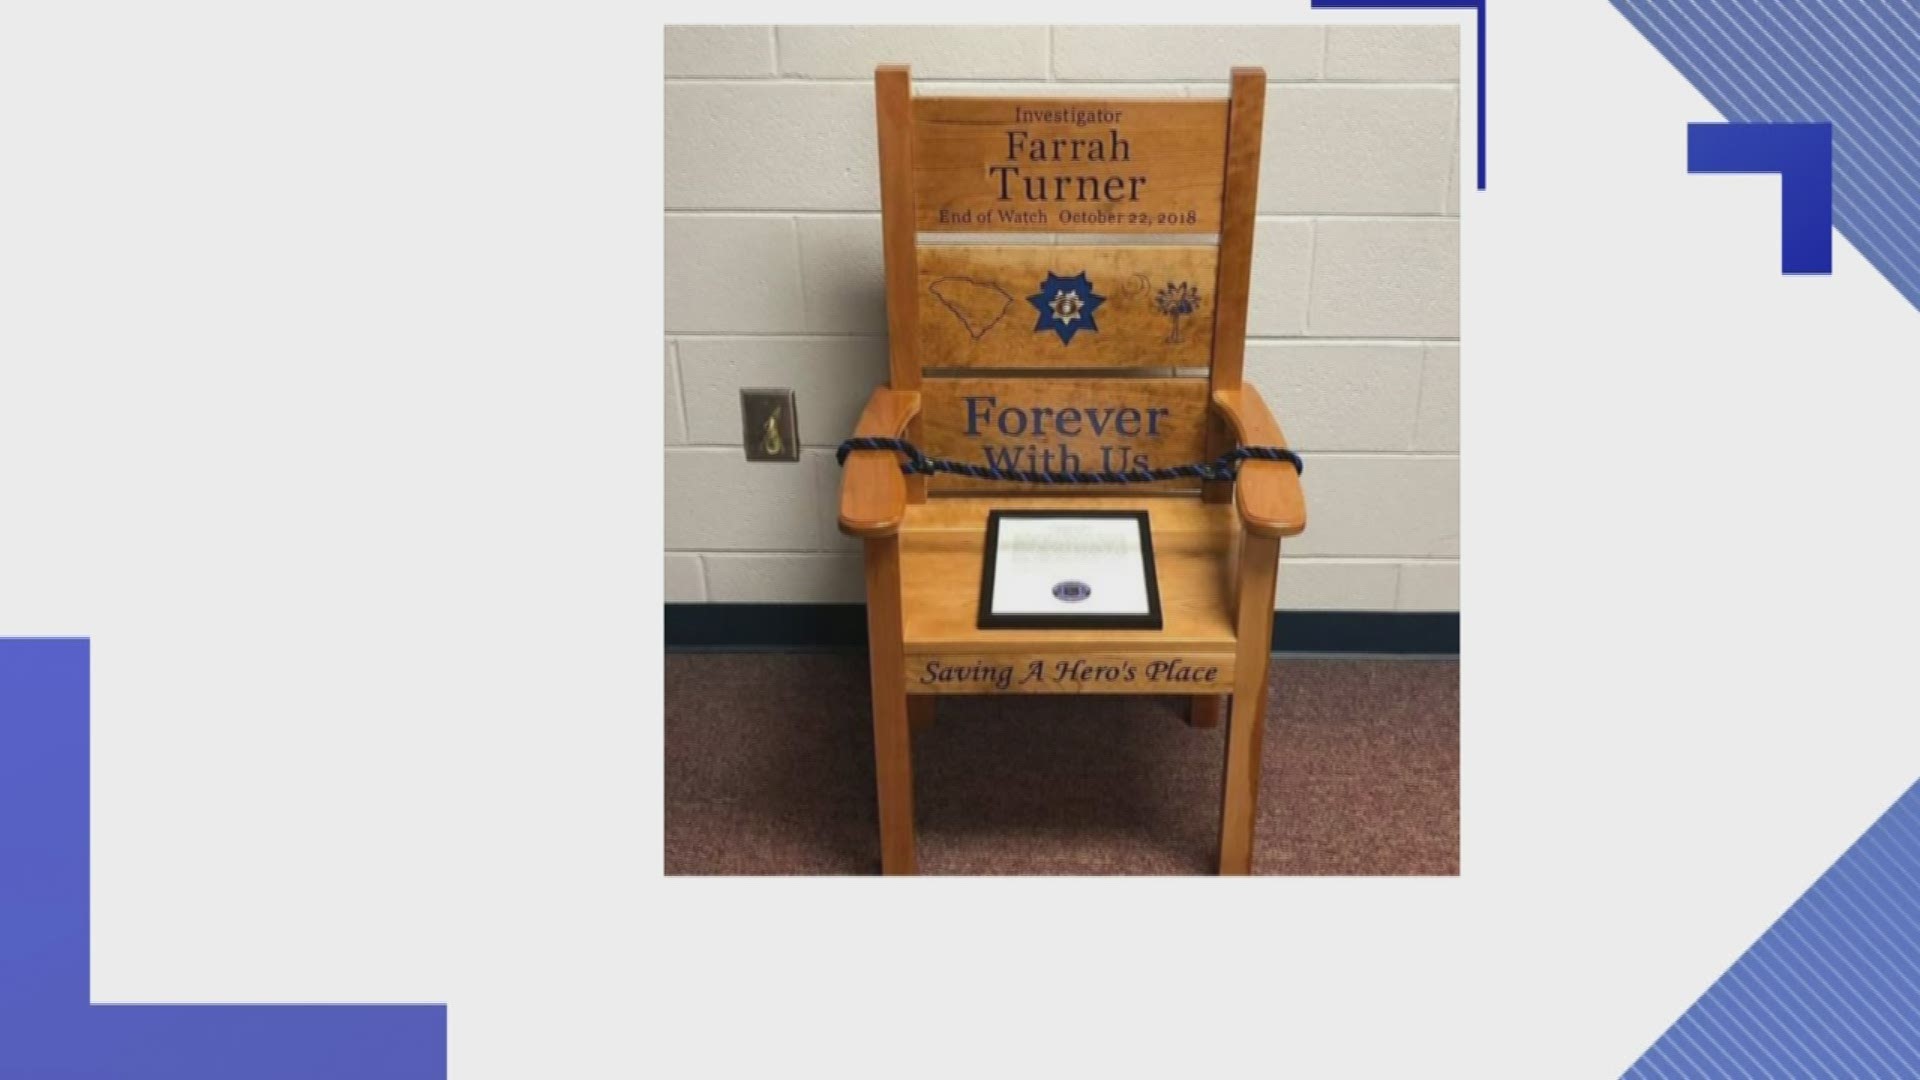 The chairs memorialize the line of duty deaths of Florence County Deputy Farrah Turner and Florence Police Officer Terrence Carraway.